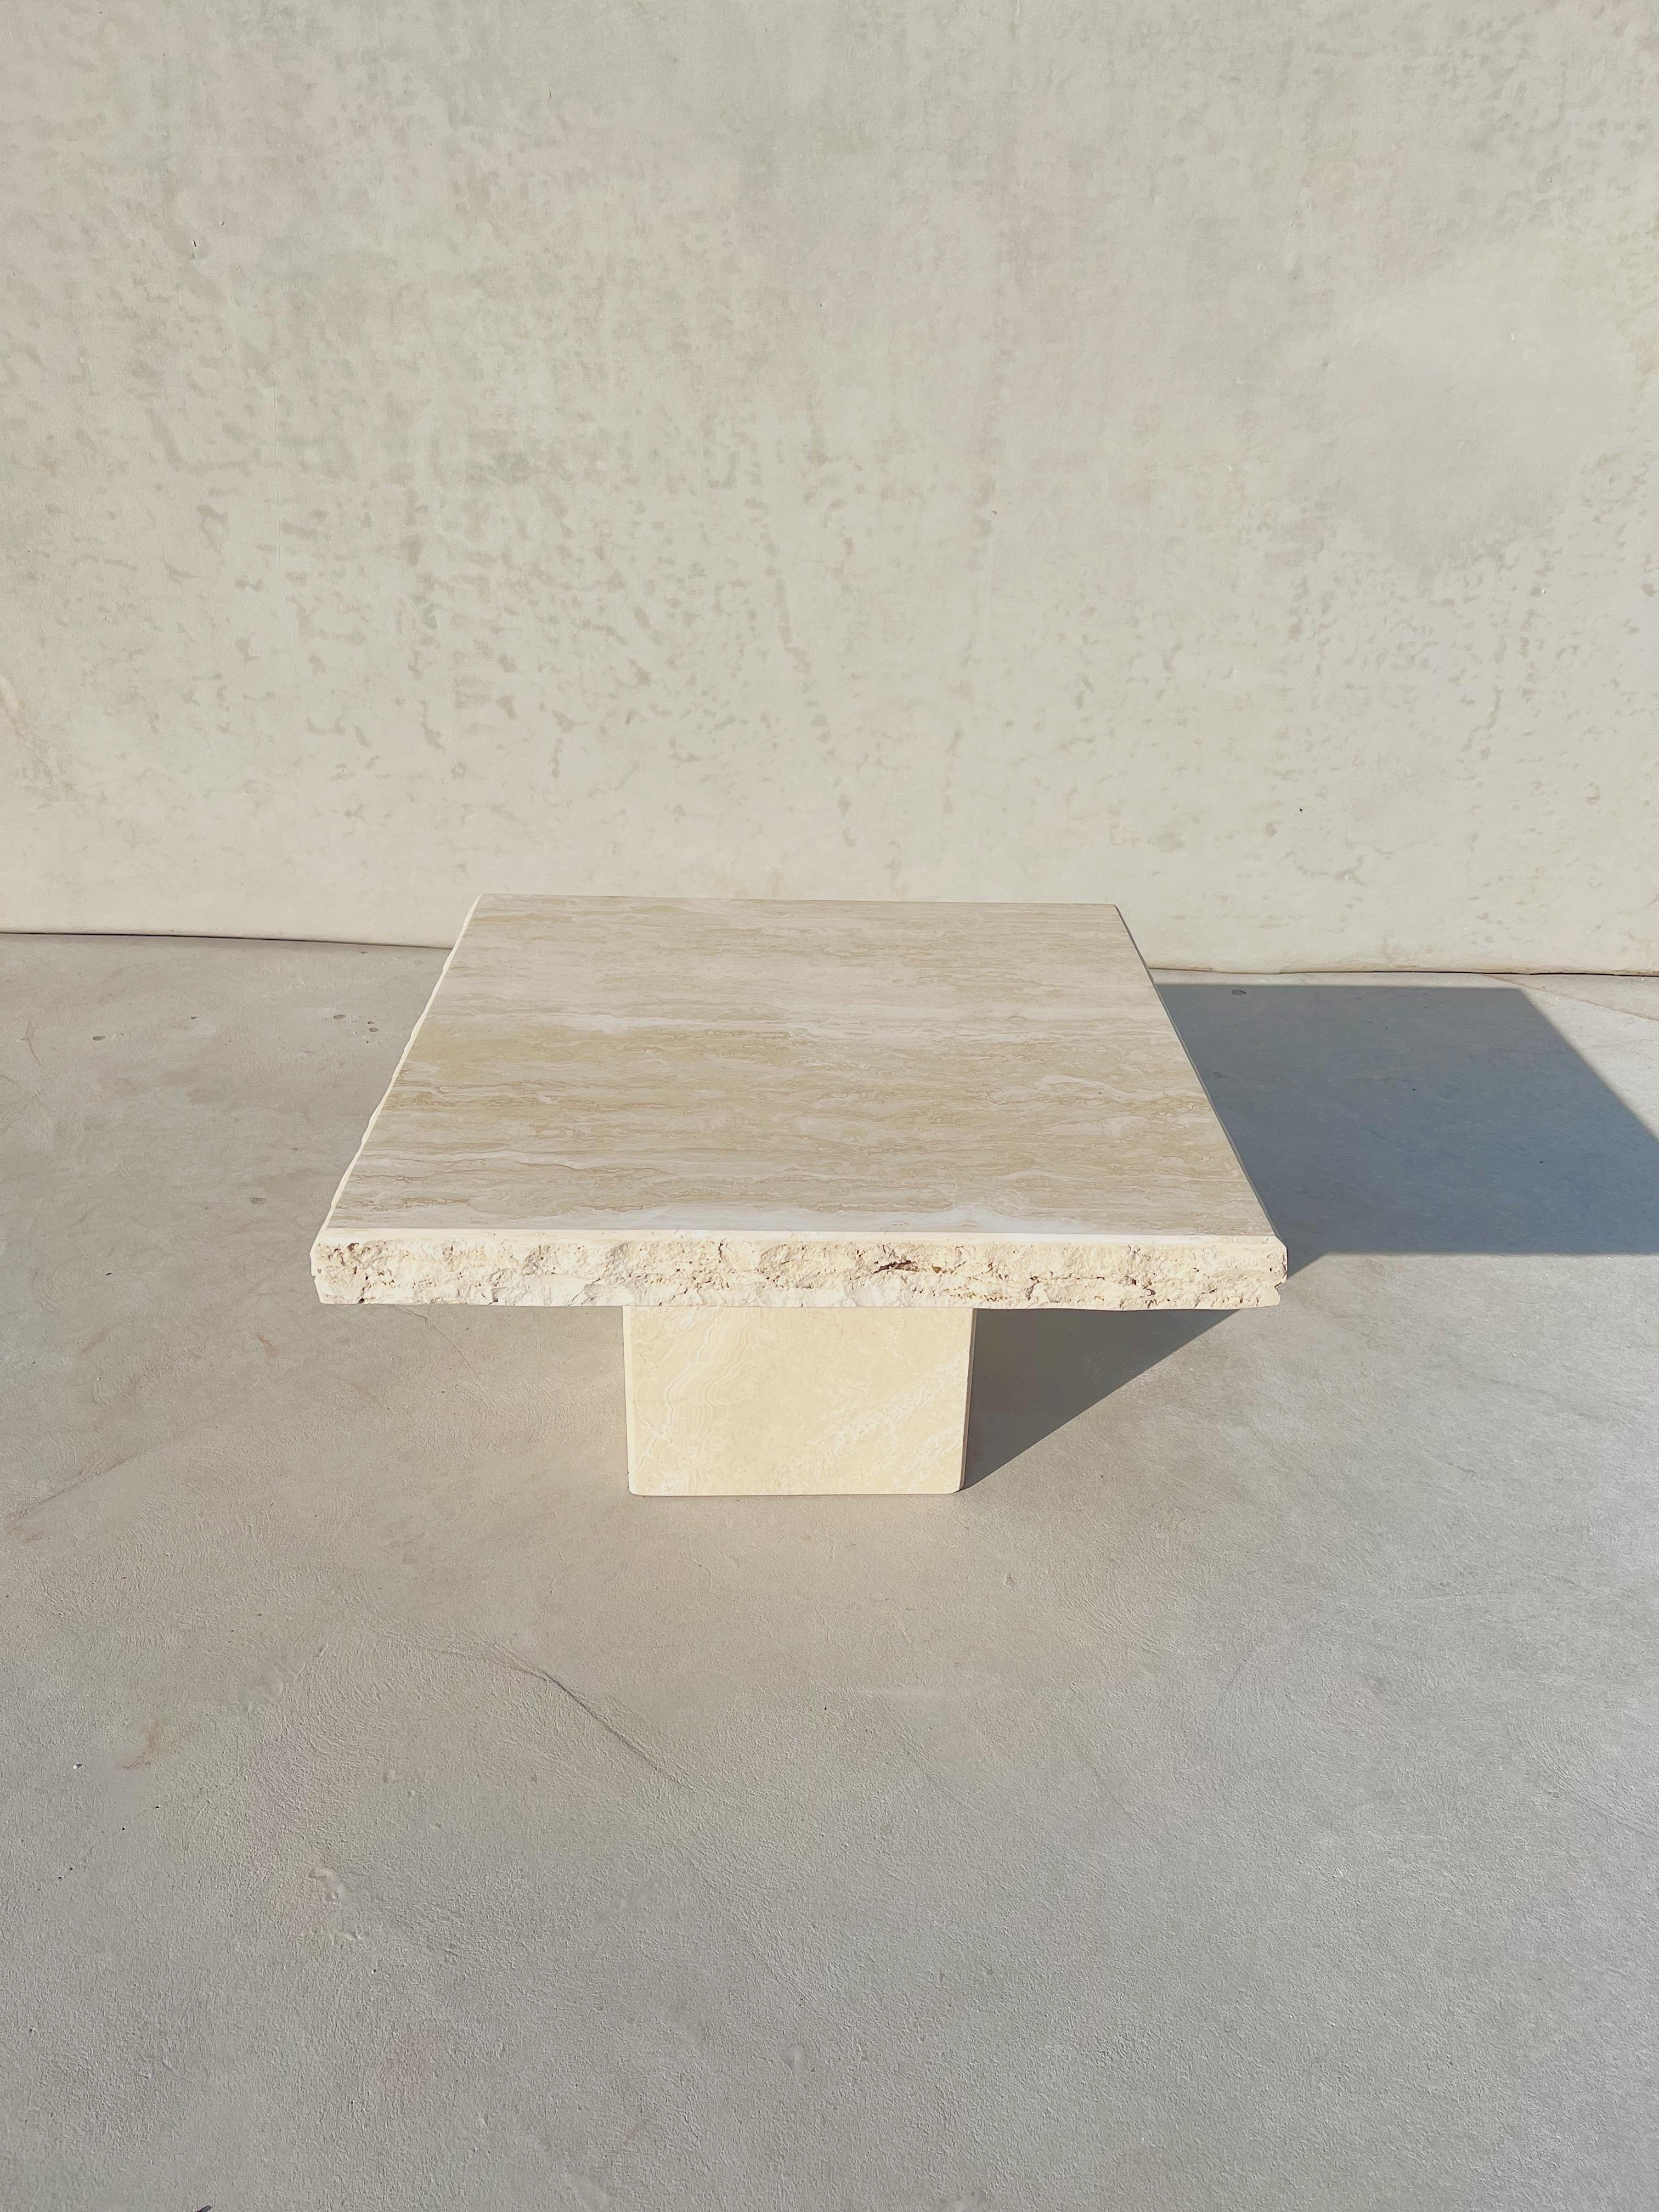 Vintage Italian Travertine square coffee table with live edges

A vintage Italian travertine coffee table, showcasing a polished base and a smooth, freshly polished and newly sealed top accented with textured live edges 

Milky, wavy, textured